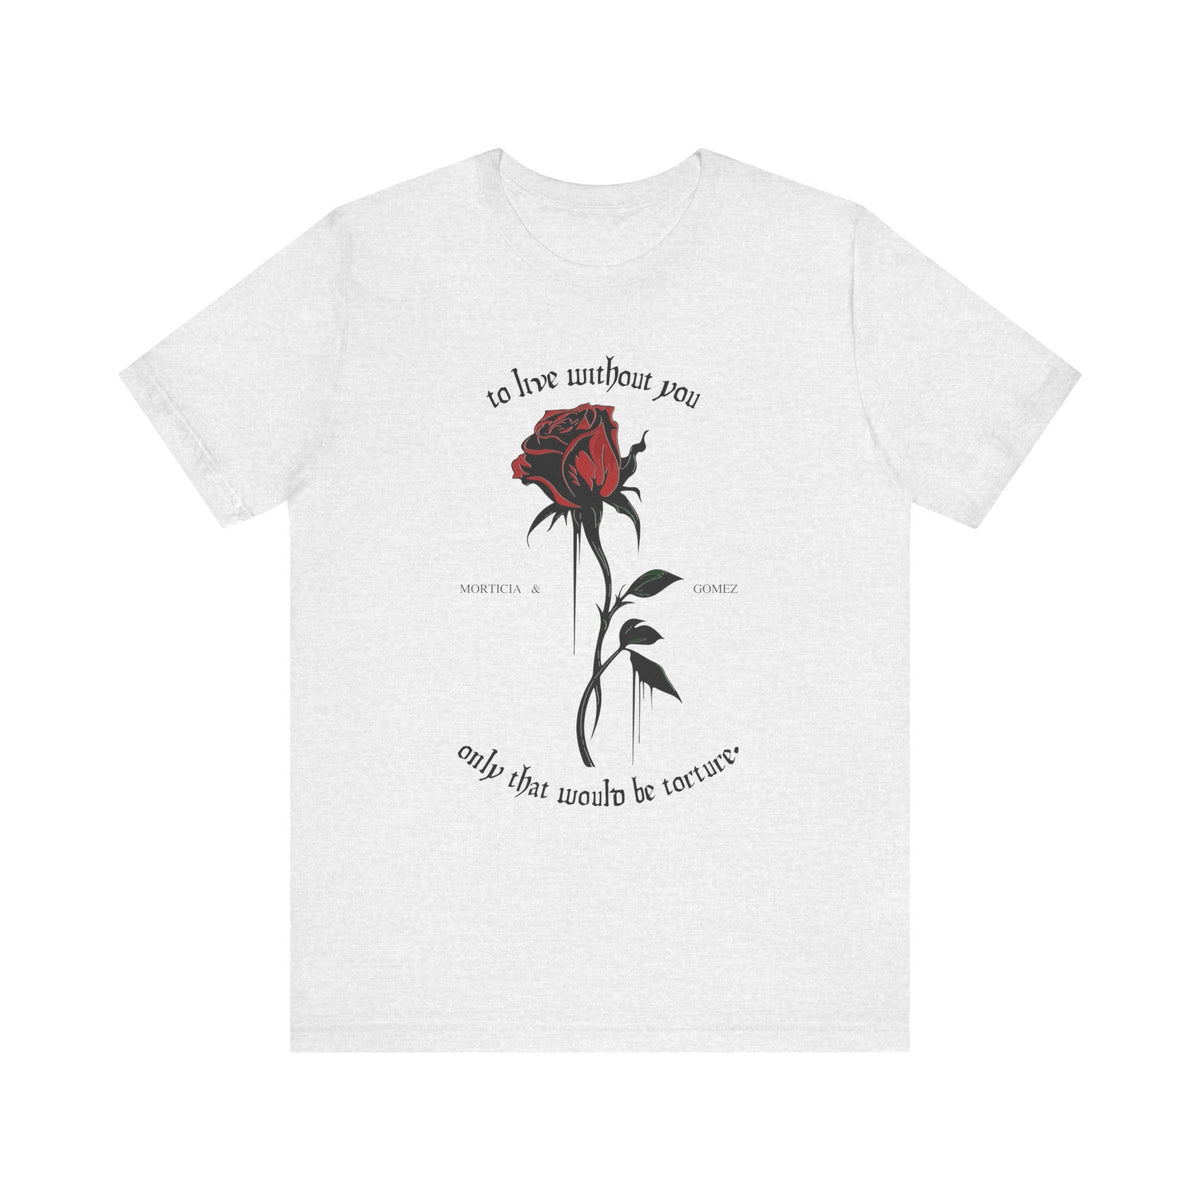 Morticia & Gomez 'To Live Without You' Gothic Rose Tee - Goth Cloth Co.T - Shirt20558794712589863793